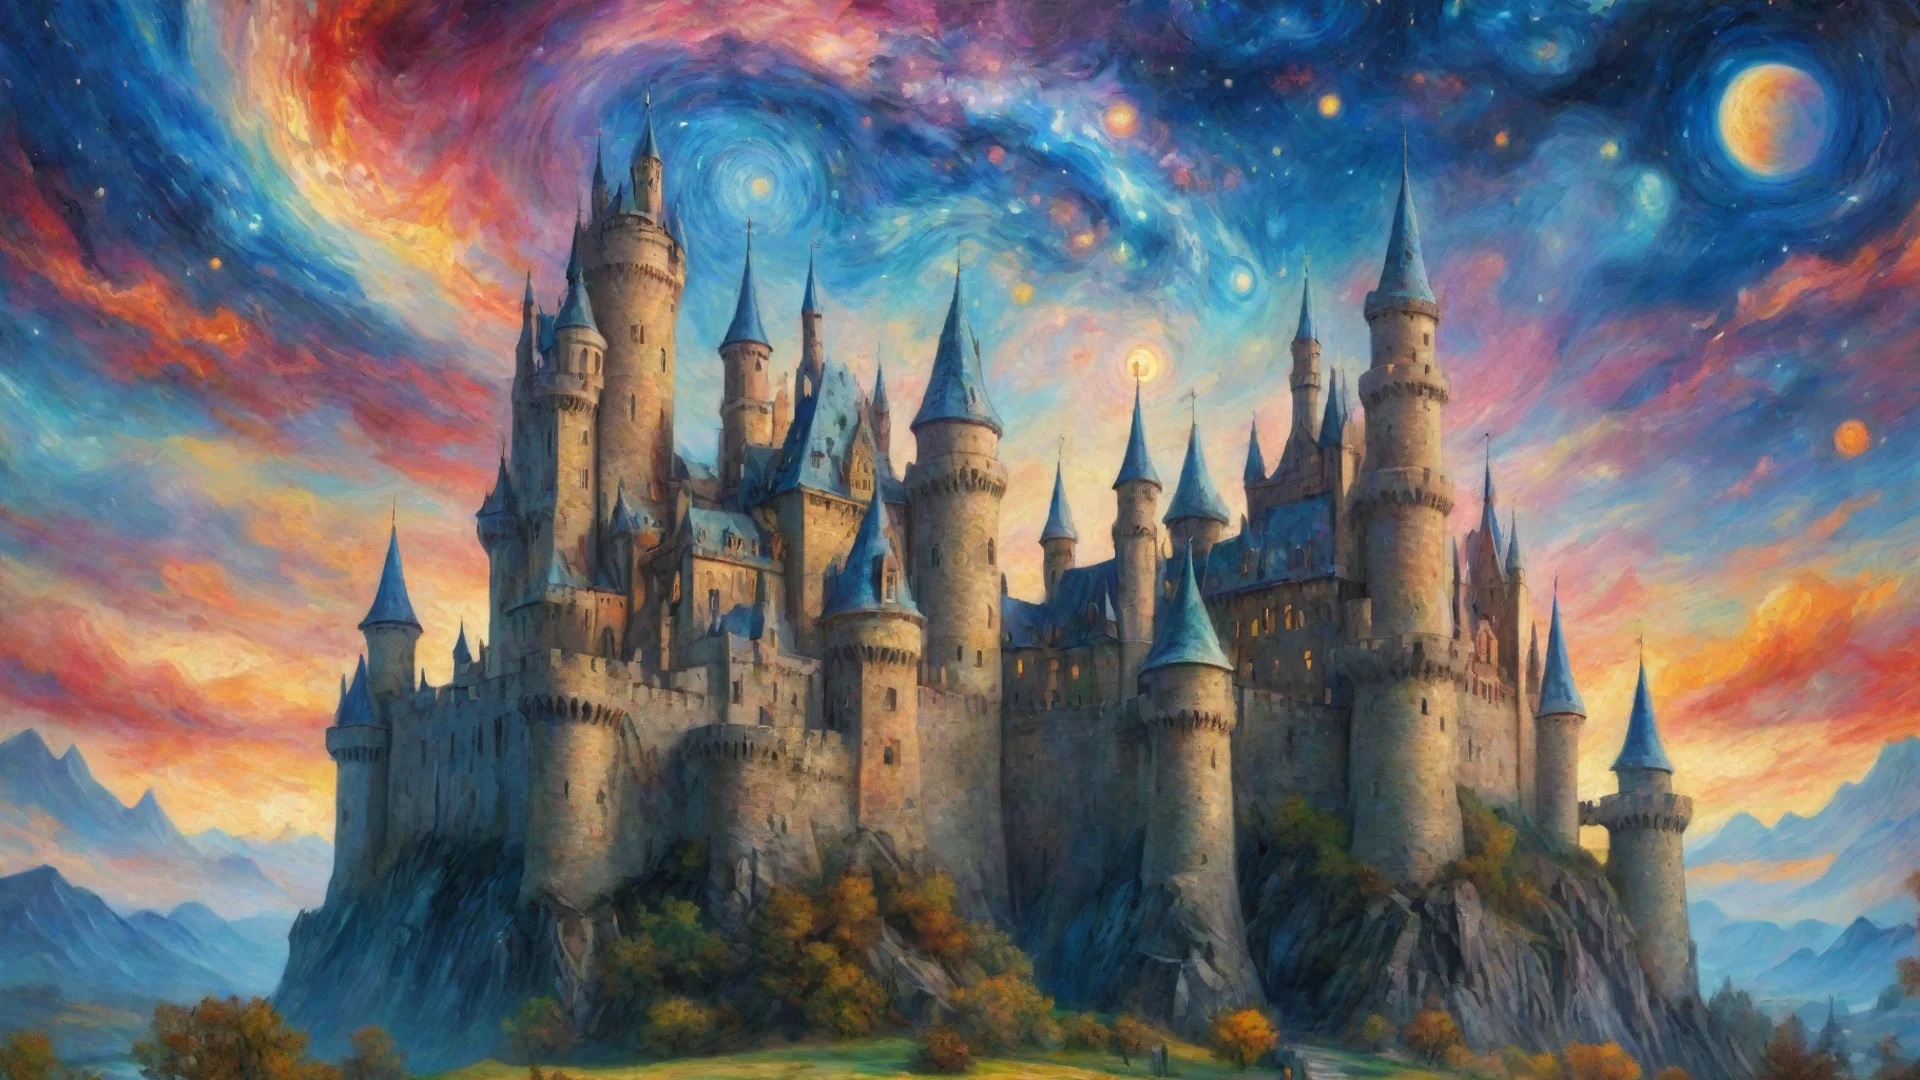 amazing epic castle with colorful artistic sky planets van gogh style detailed hd asthetic castle awesome portrait 2 wide